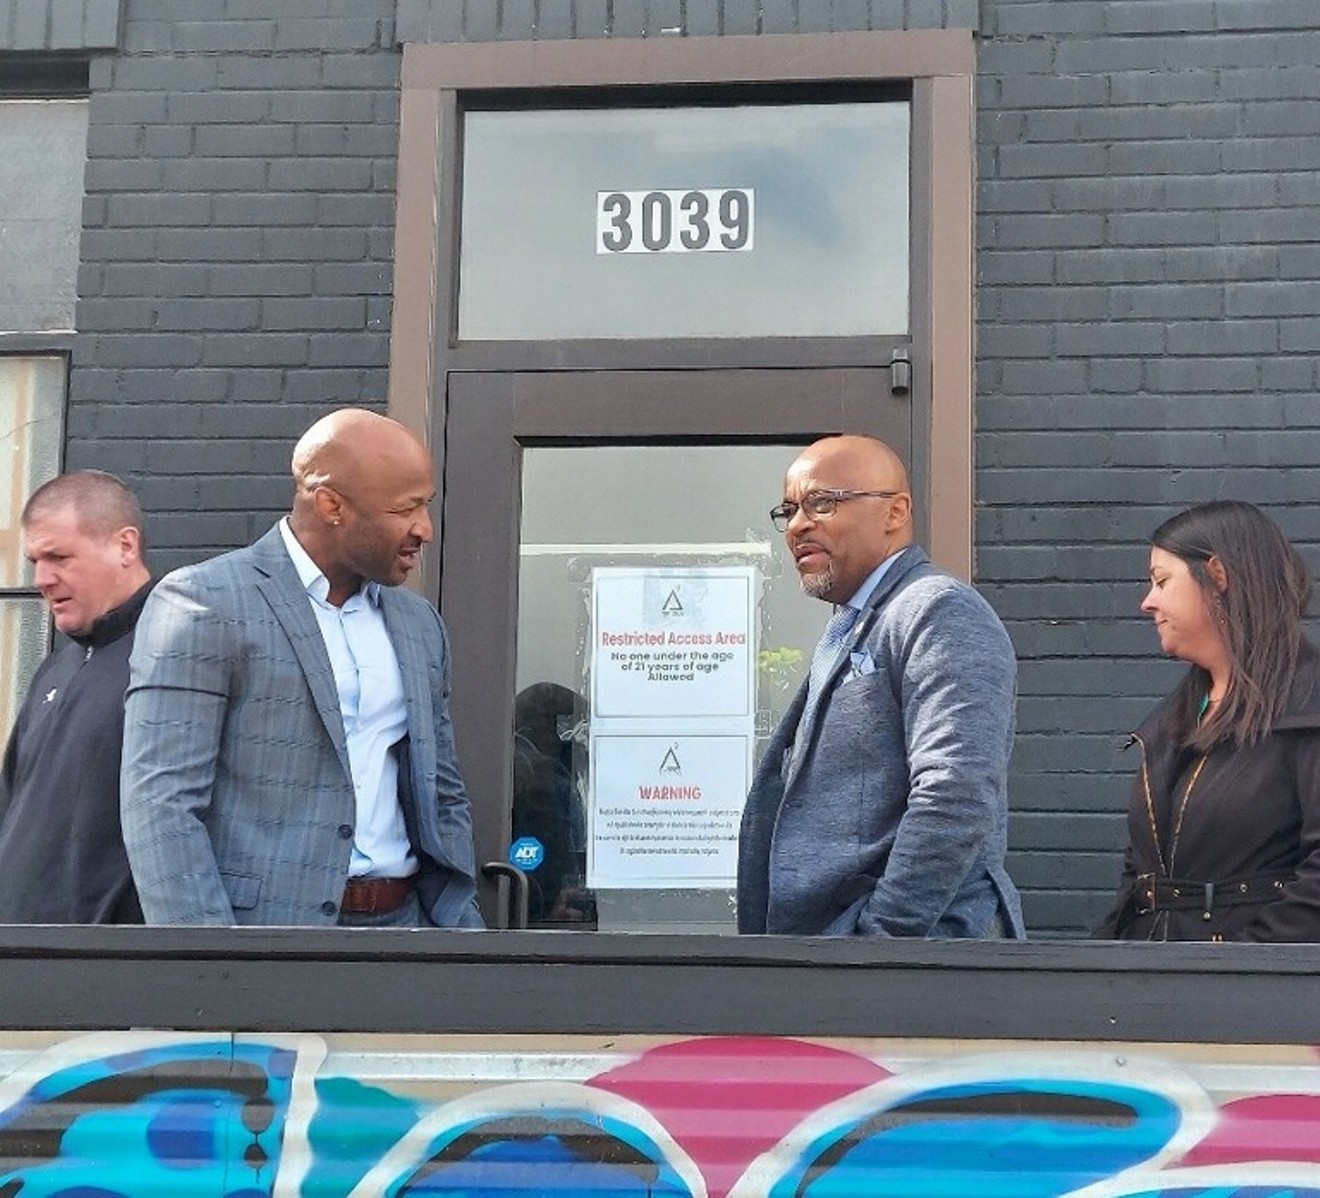 Tetra Lounge owner Dewayne Benjamin greets Mayor Michael Hancock and Denver Department of Excise and Licenses director Molly Duplechian during a ribbon-cutting ceremony March 30.